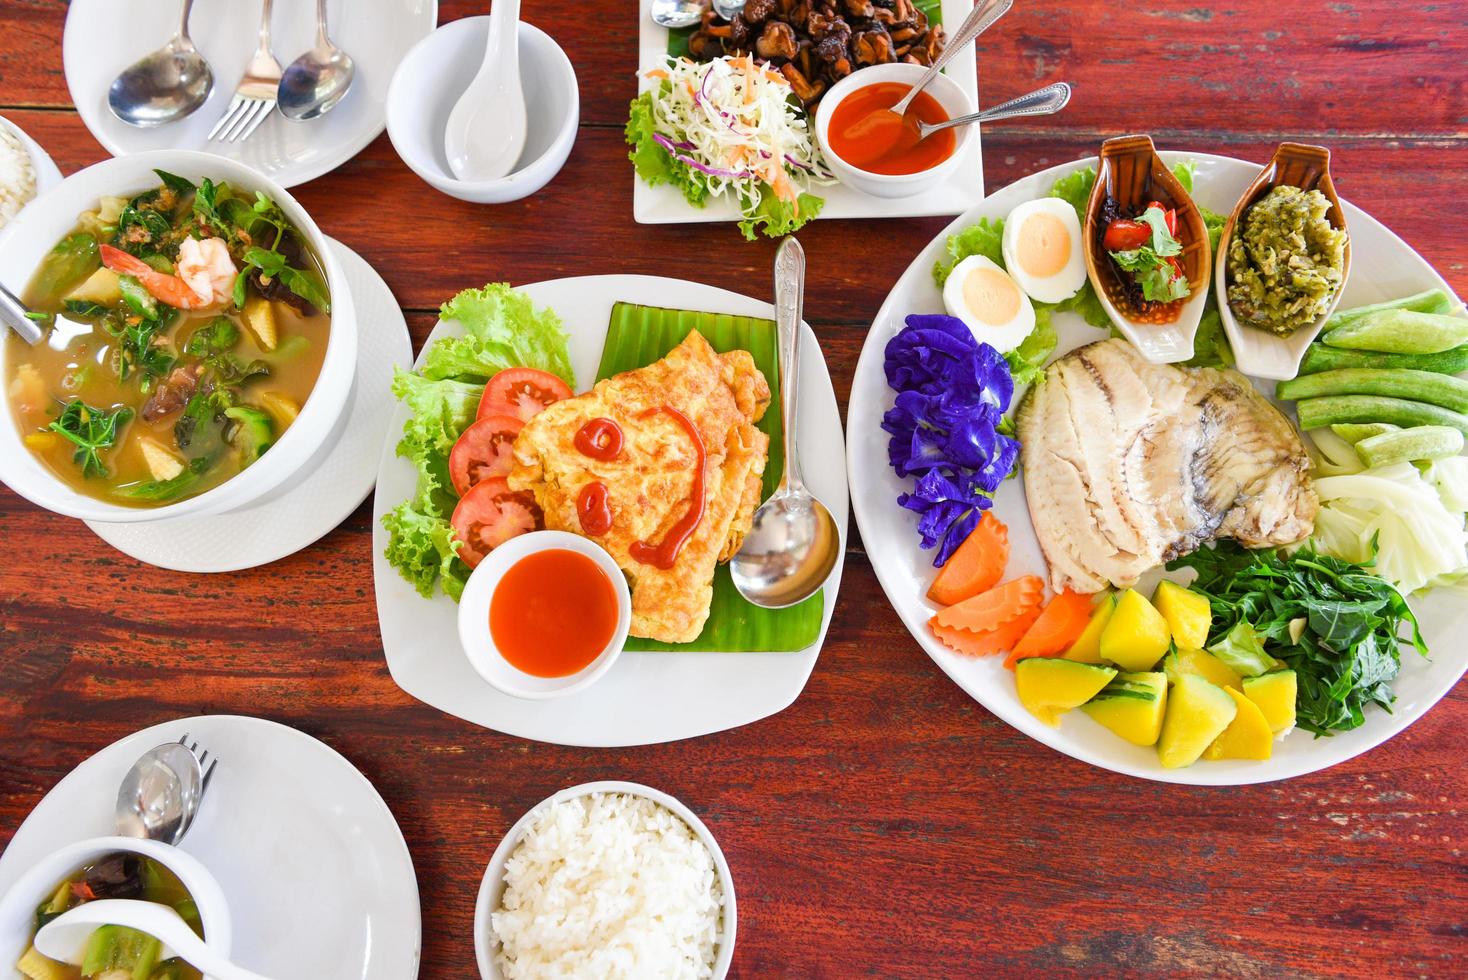 thai food top view asian food served on wooden table setting with plate menu in thailand photo